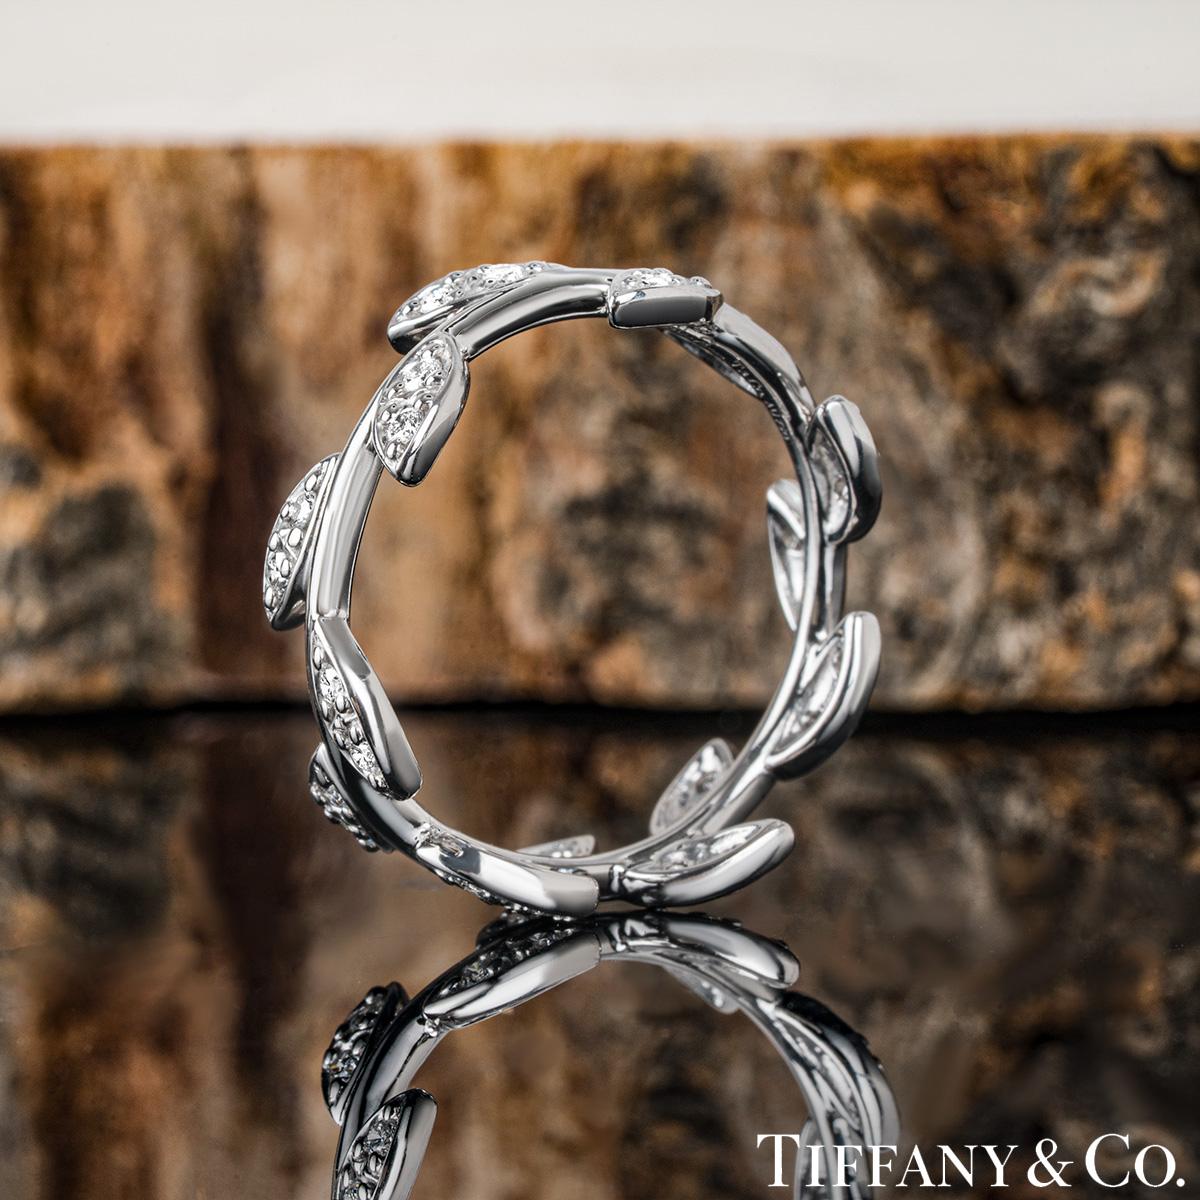 Tiffany & Co. White Gold Diamond Olive Leaf Band Ring In Excellent Condition For Sale In London, GB